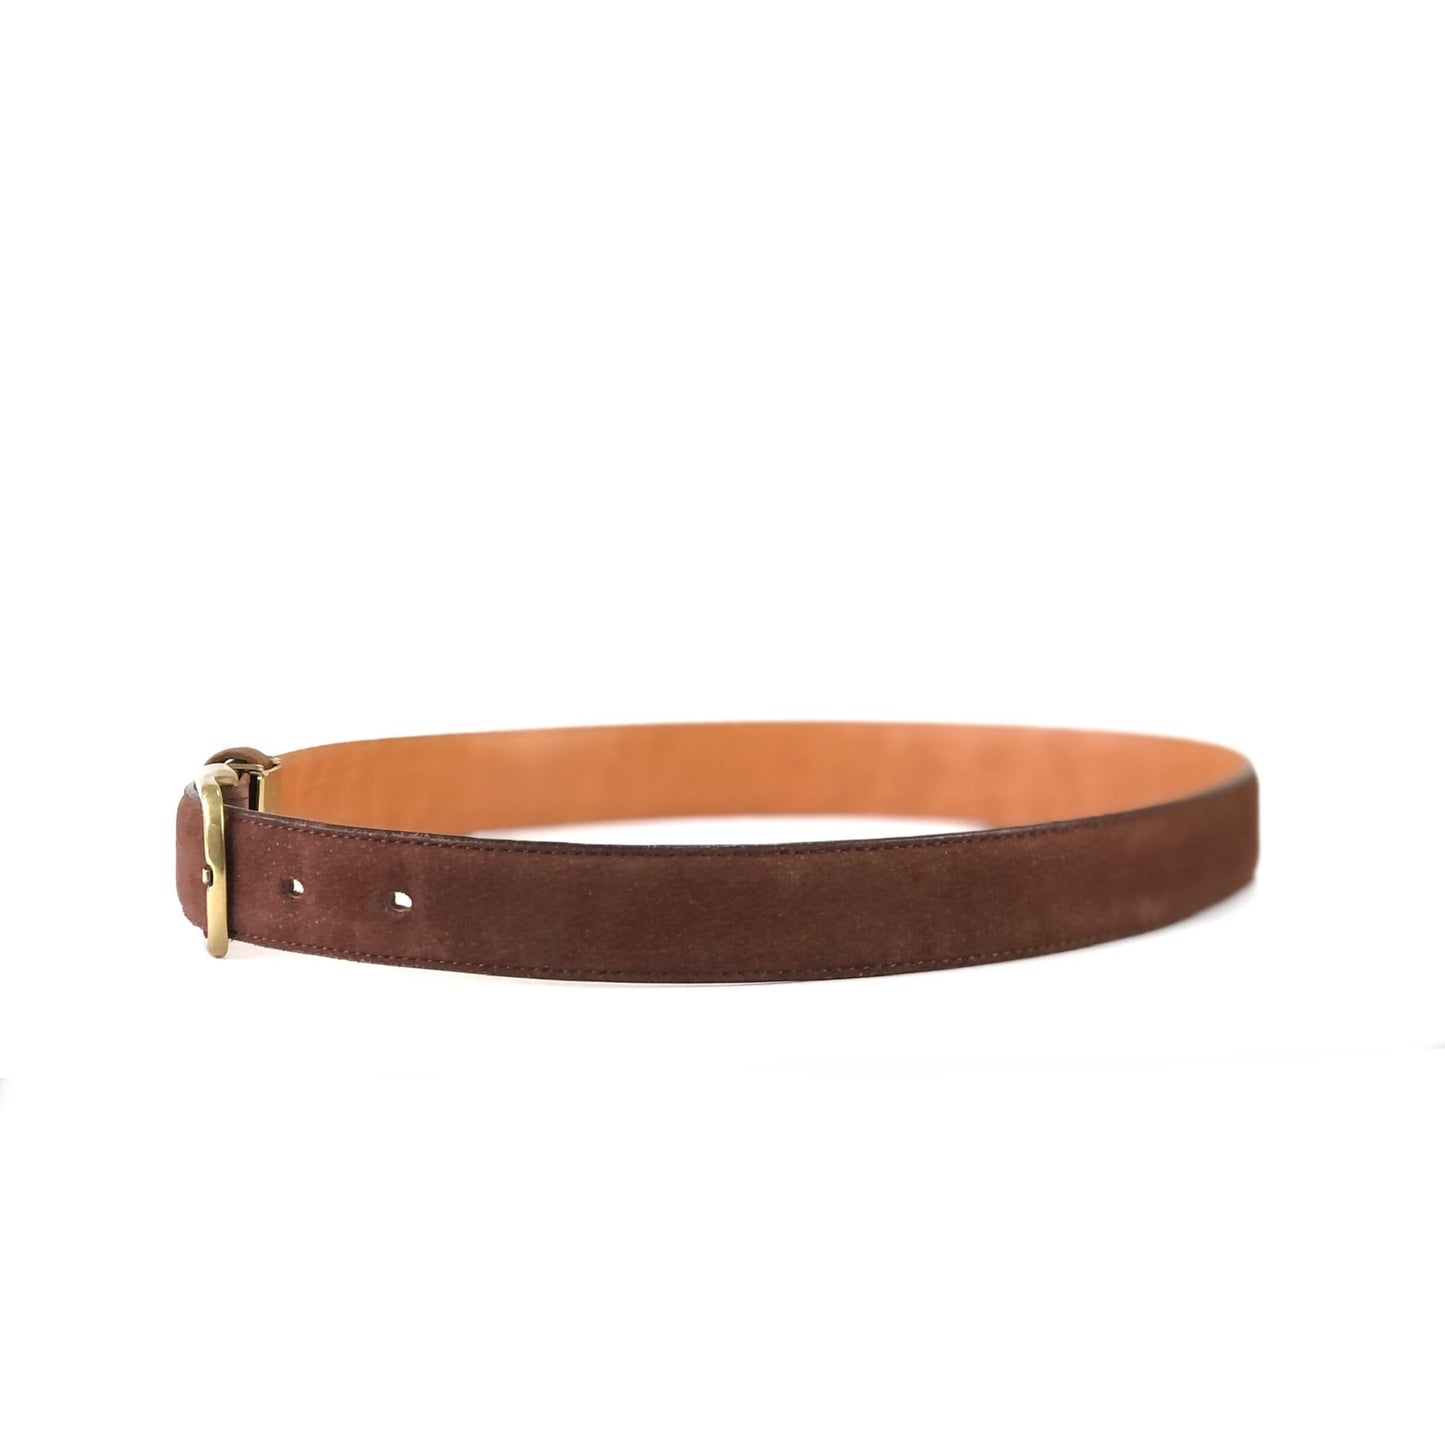 Burberrys Burberry logo belt leather suede brown jvypa3